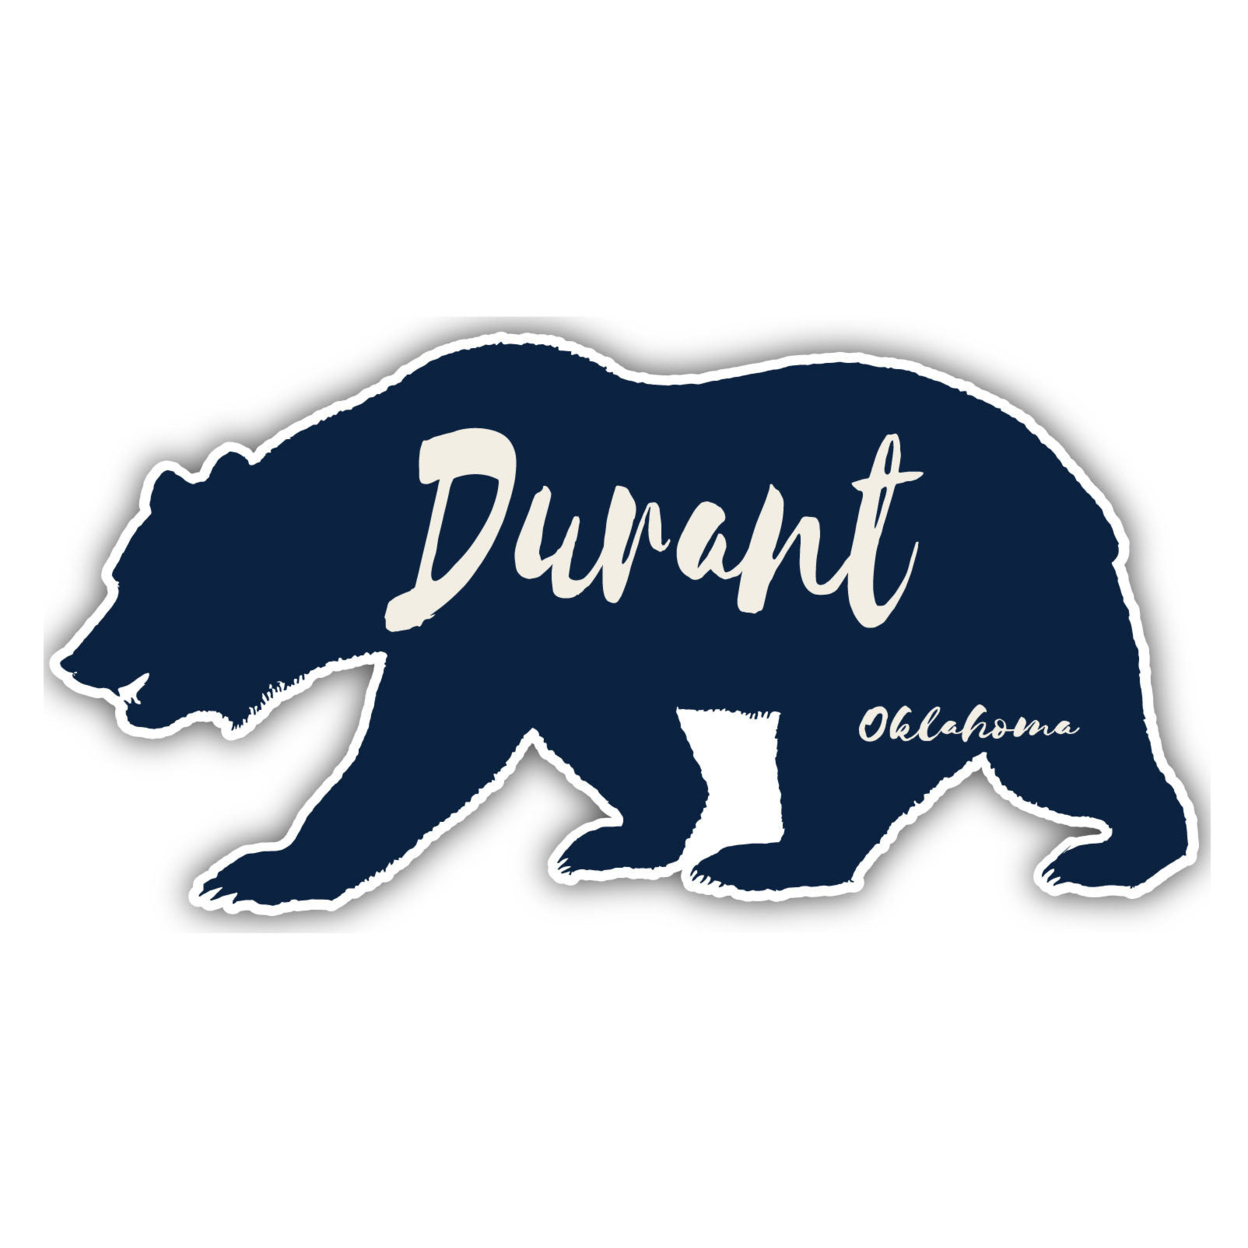 Durant Oklahoma Souvenir Decorative Stickers (Choose Theme And Size) - 4-Pack, 10-Inch, Camp Life